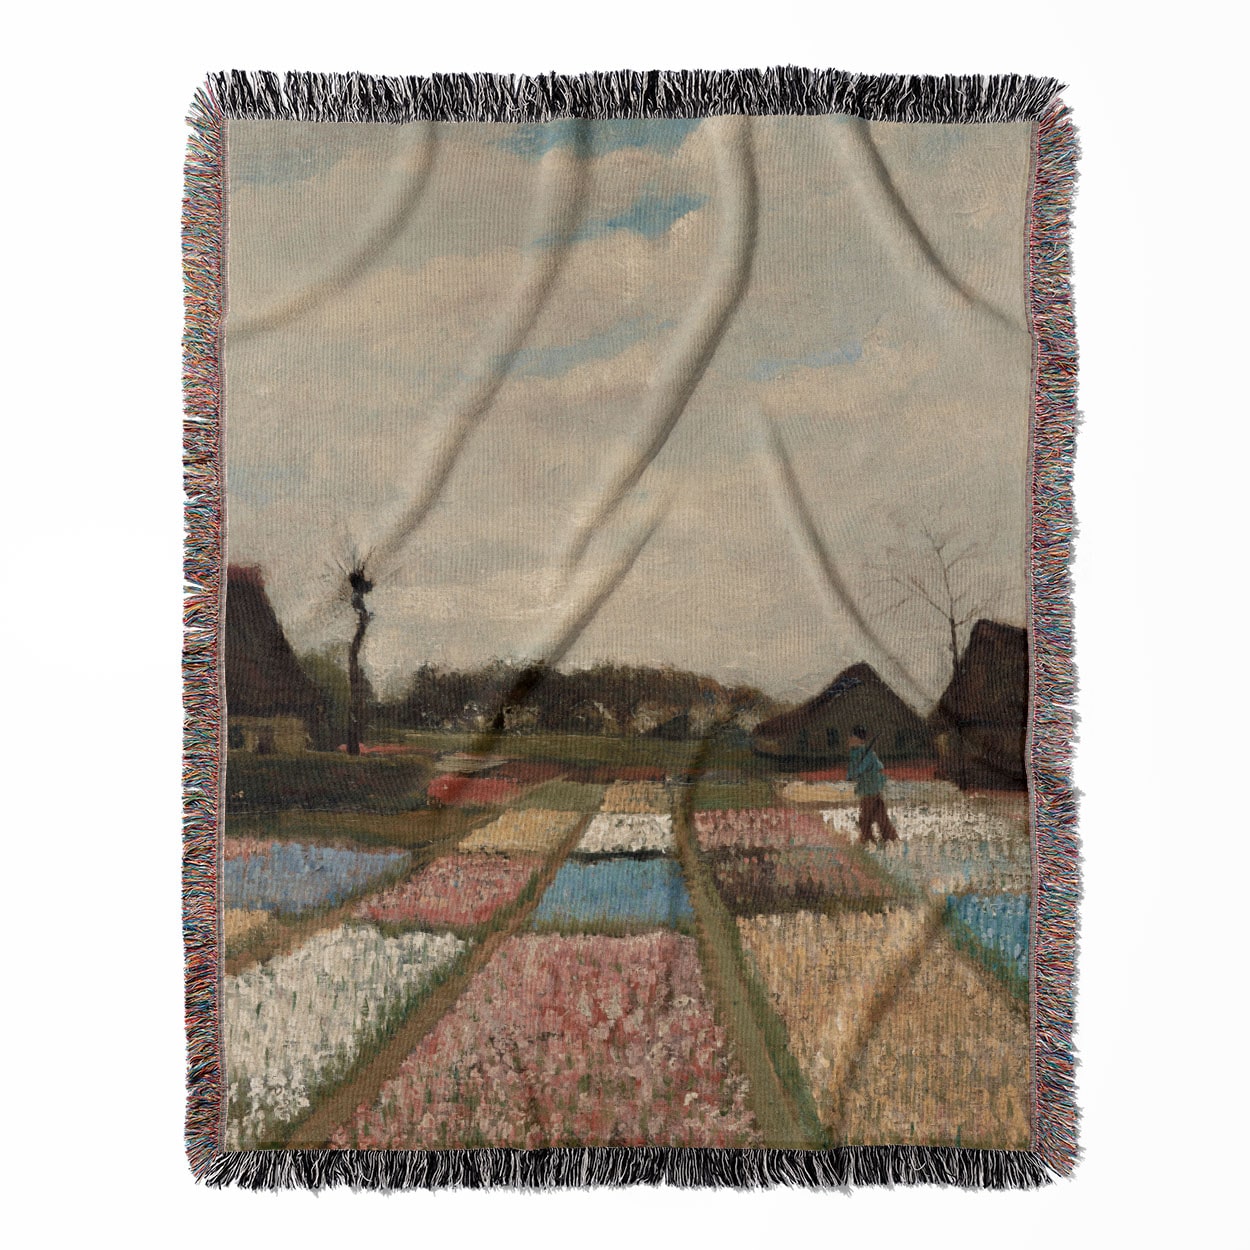 Floral Landscape woven throw blanket, made with 100% cotton, providing a soft and cozy texture with a flower field painting for home decor.